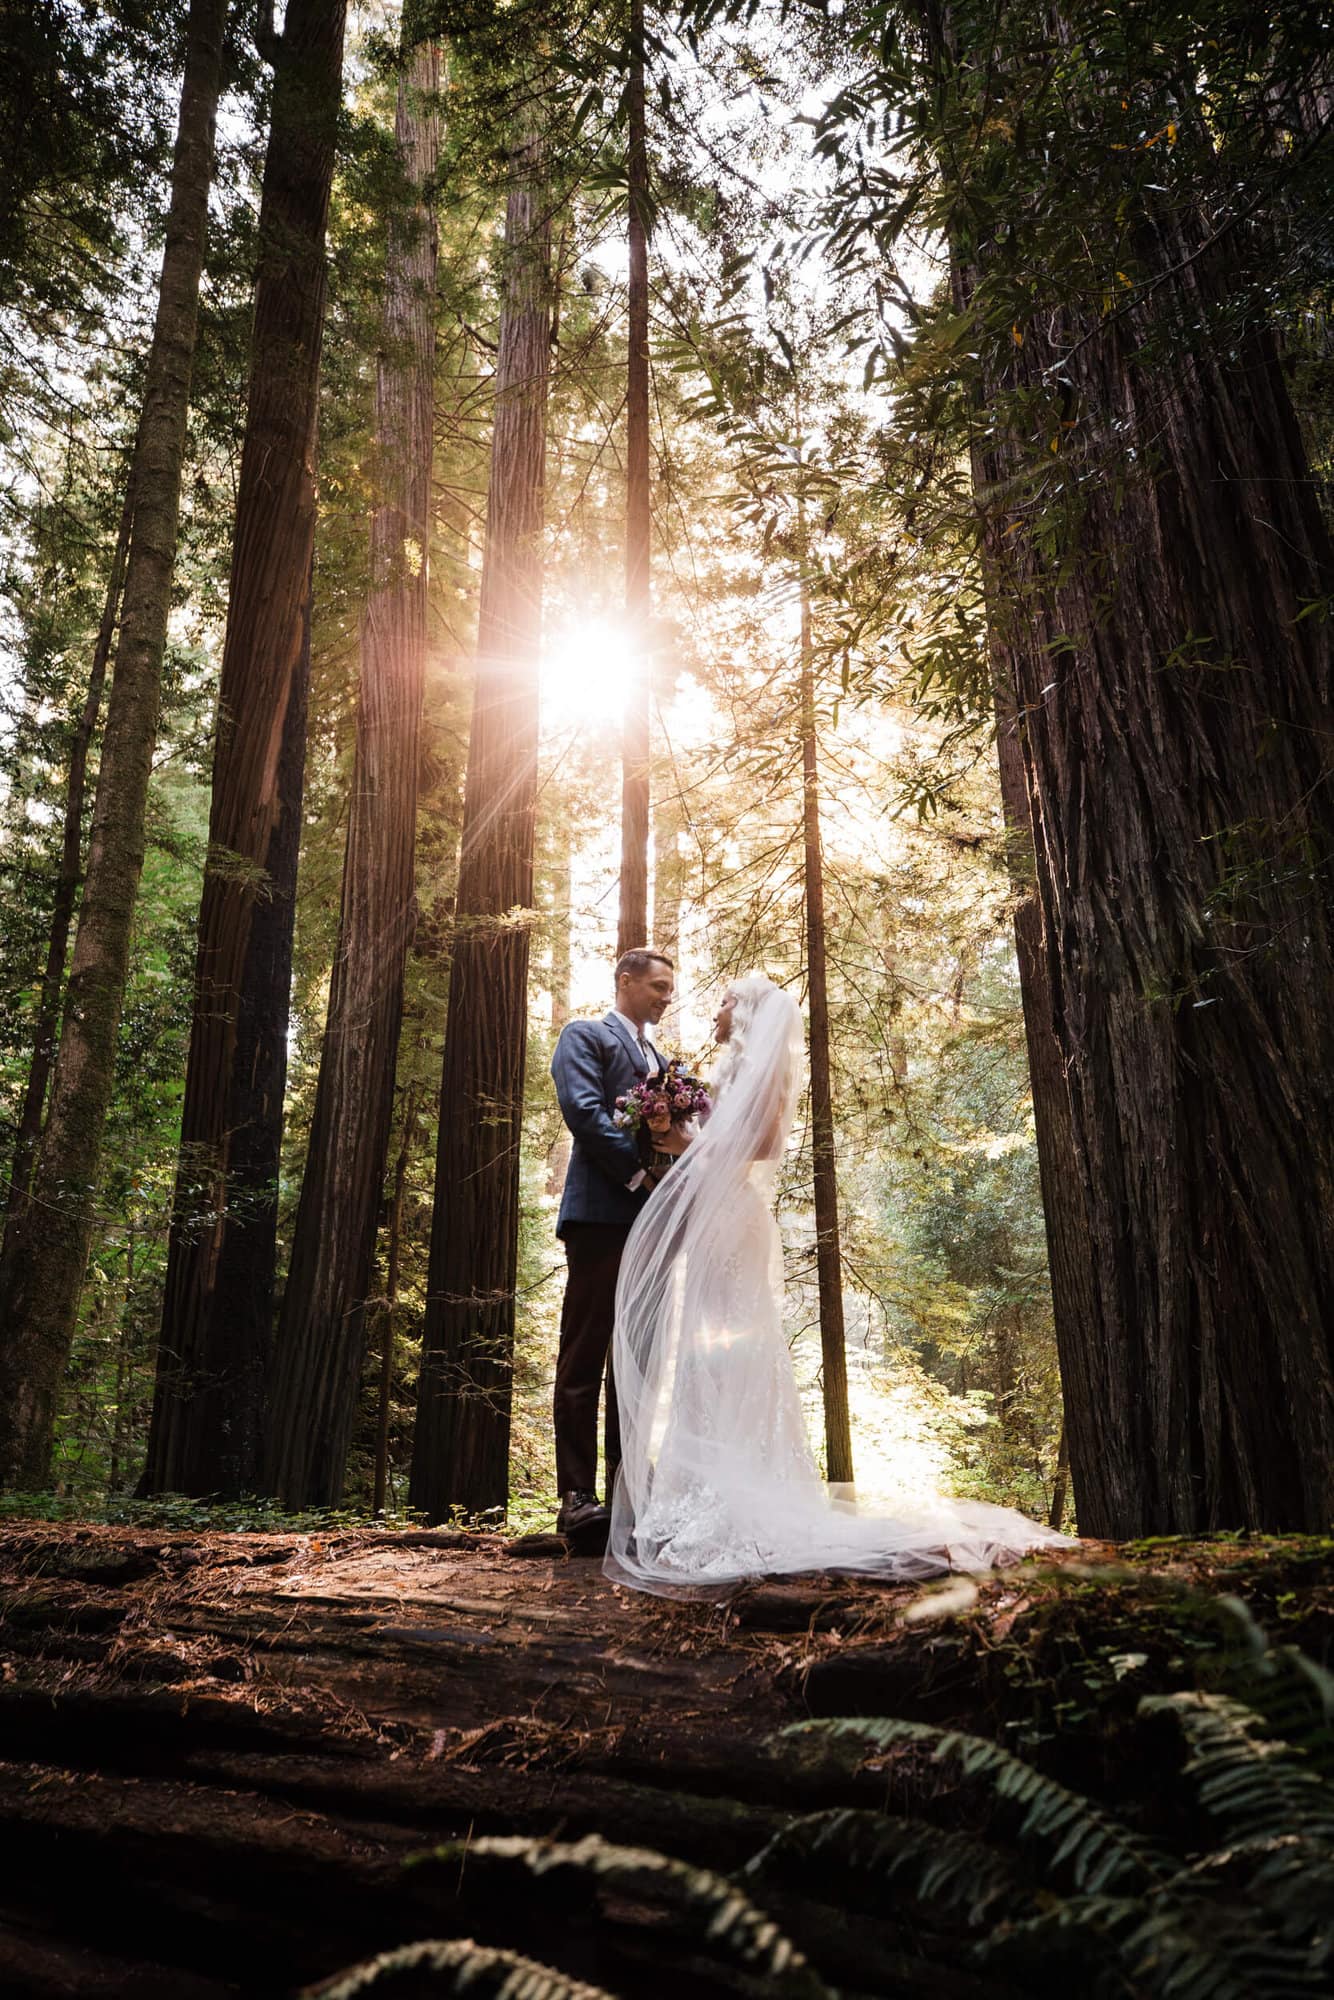 This couple had the most magical and emotional intimate wedding in the Redwoods. You have to see all the joy and beauty yourself.